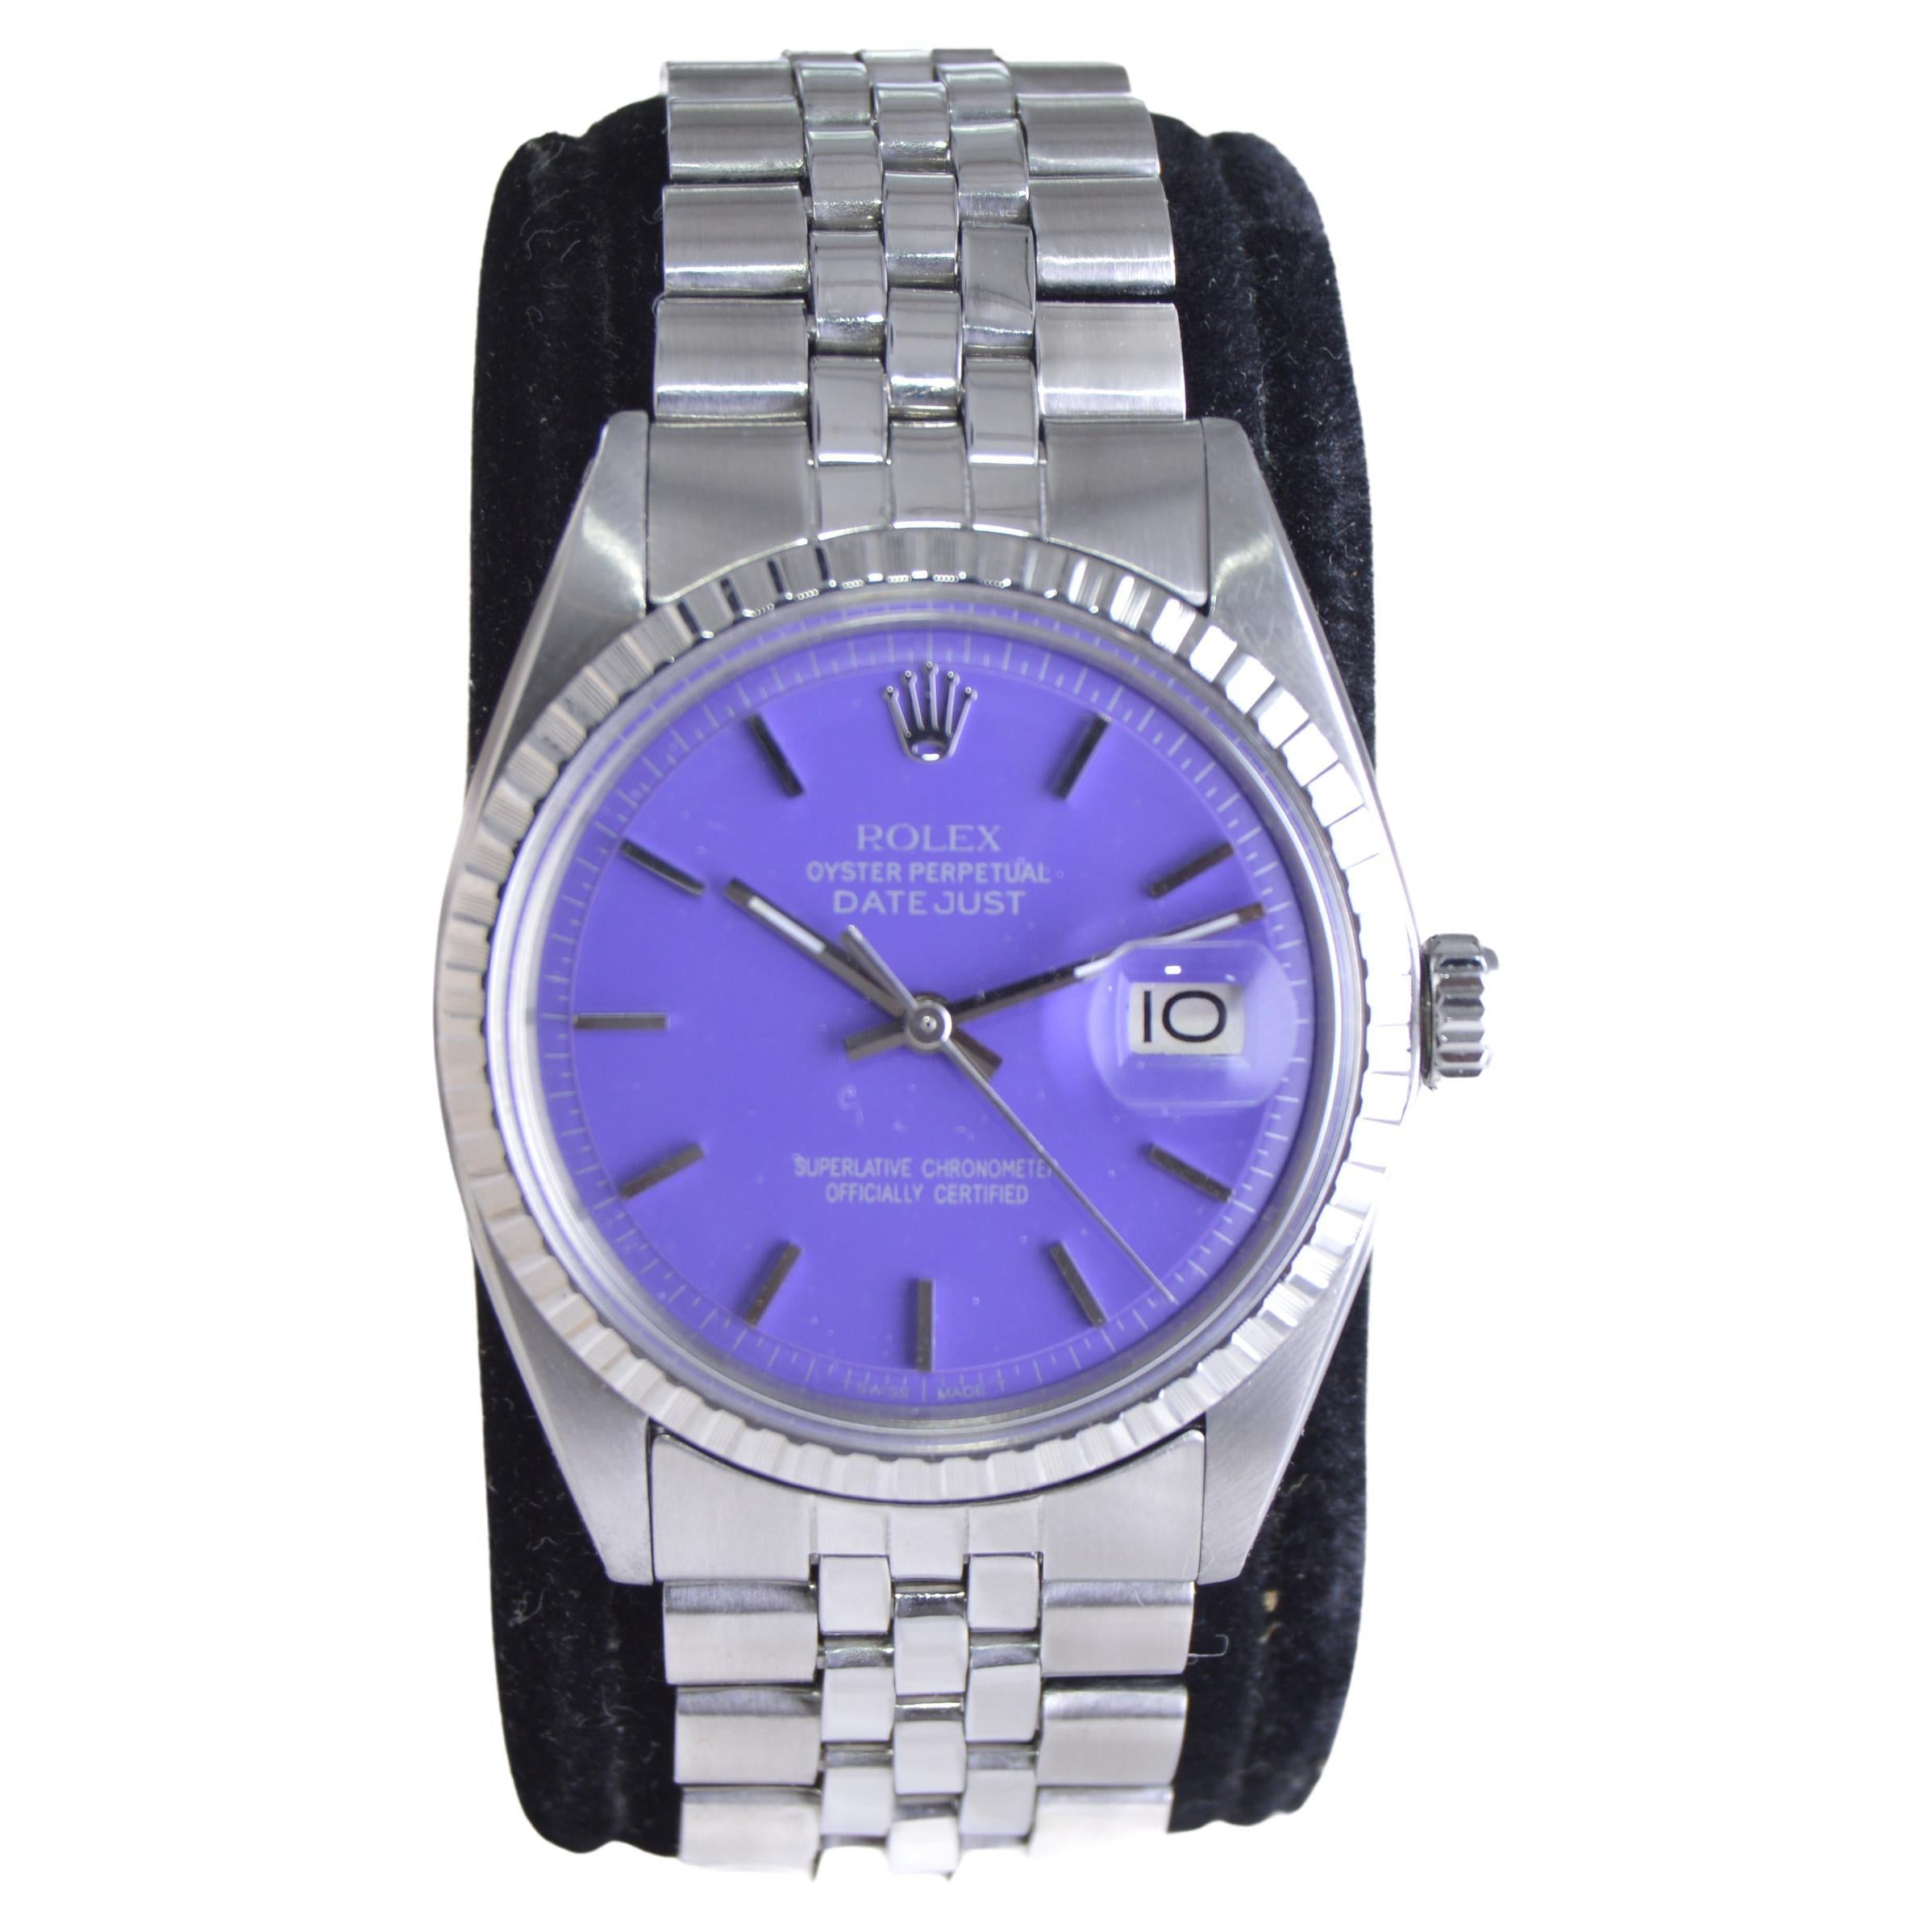 Rolex Steel Datejust with Custom Finished Purple Dial, 1970s For Sale